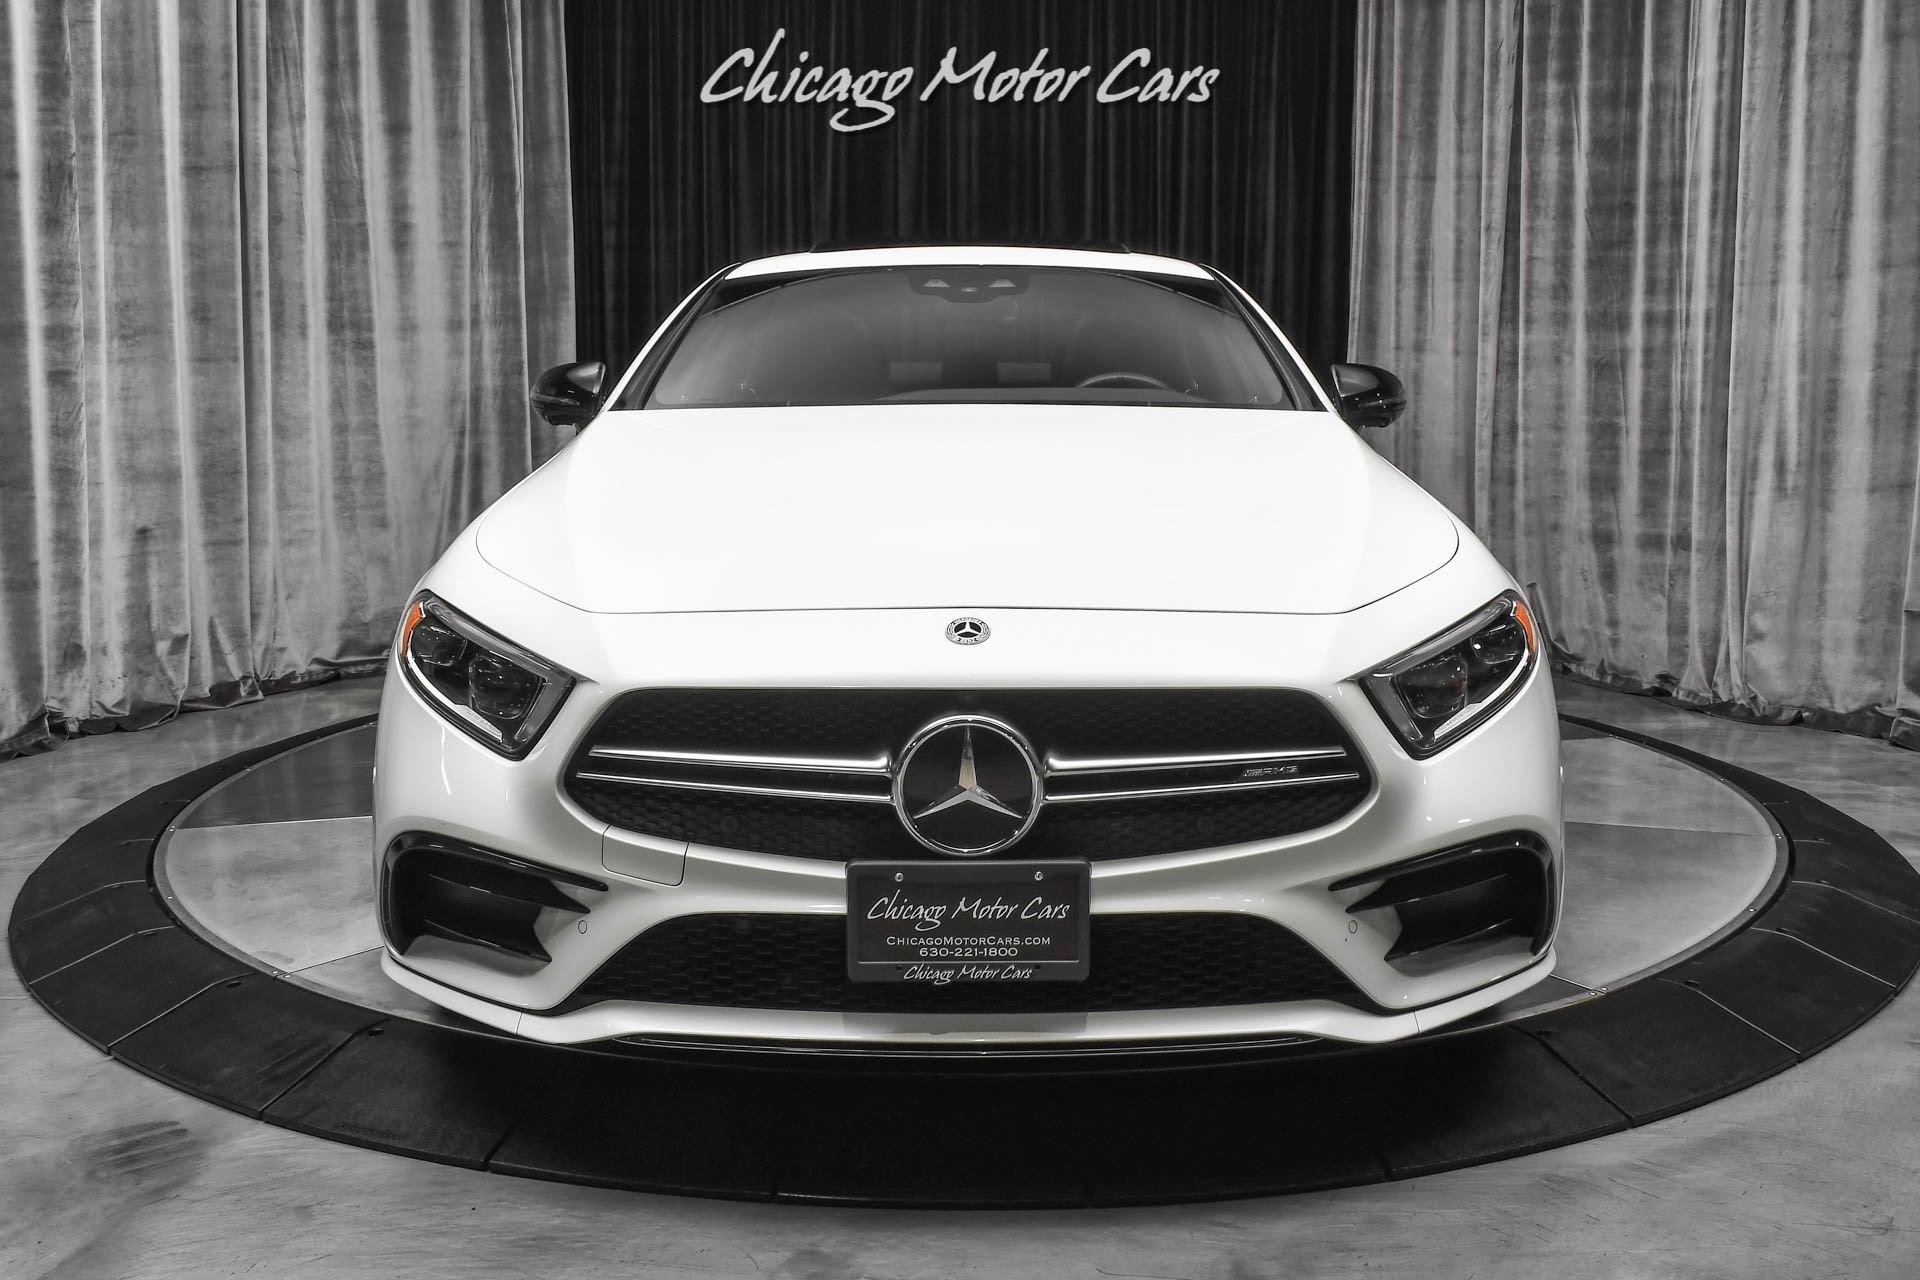 Used-2019-Mercedes-Benz-CLS53-AMG-S-4Matic-Huge-MSRP-Driver-Assistance-Package-AMG-Night-Pack-Loaded